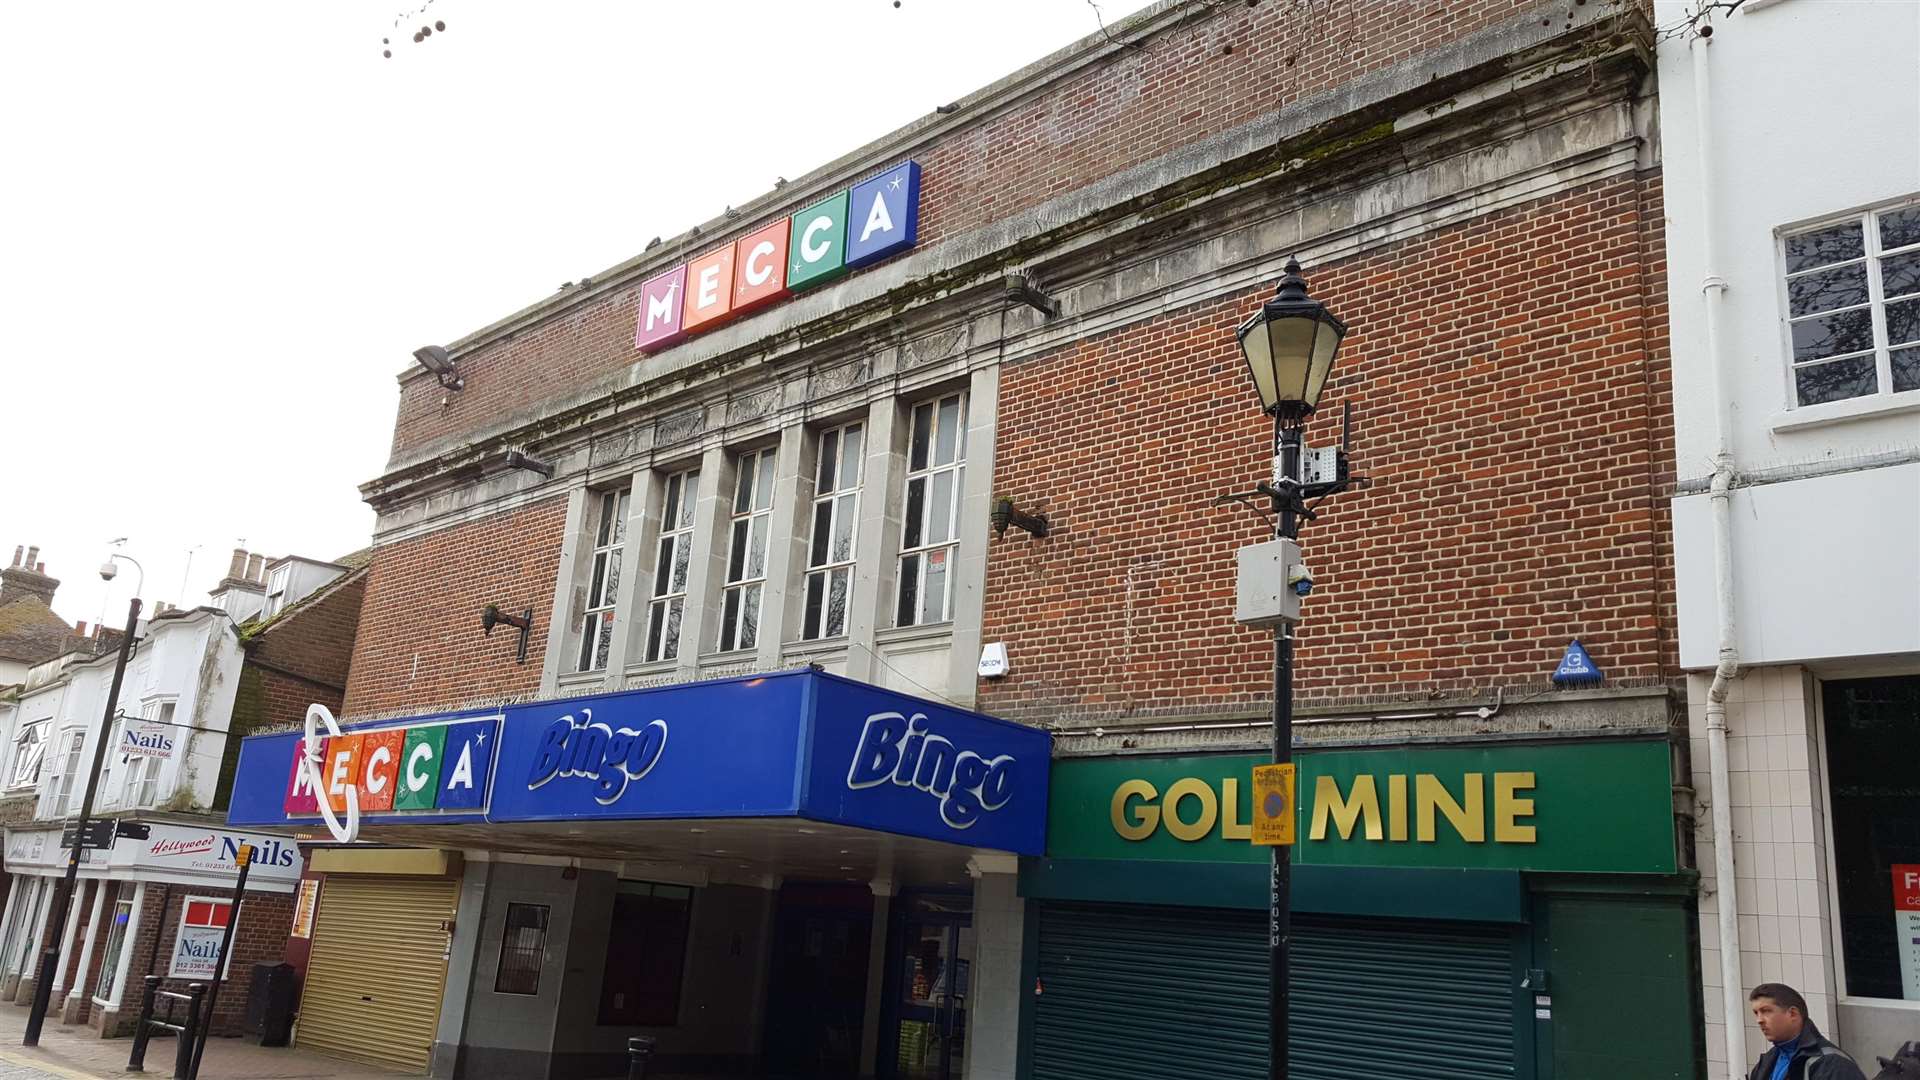 The Mecca Bingo hall has been bought by ABC (1517034)